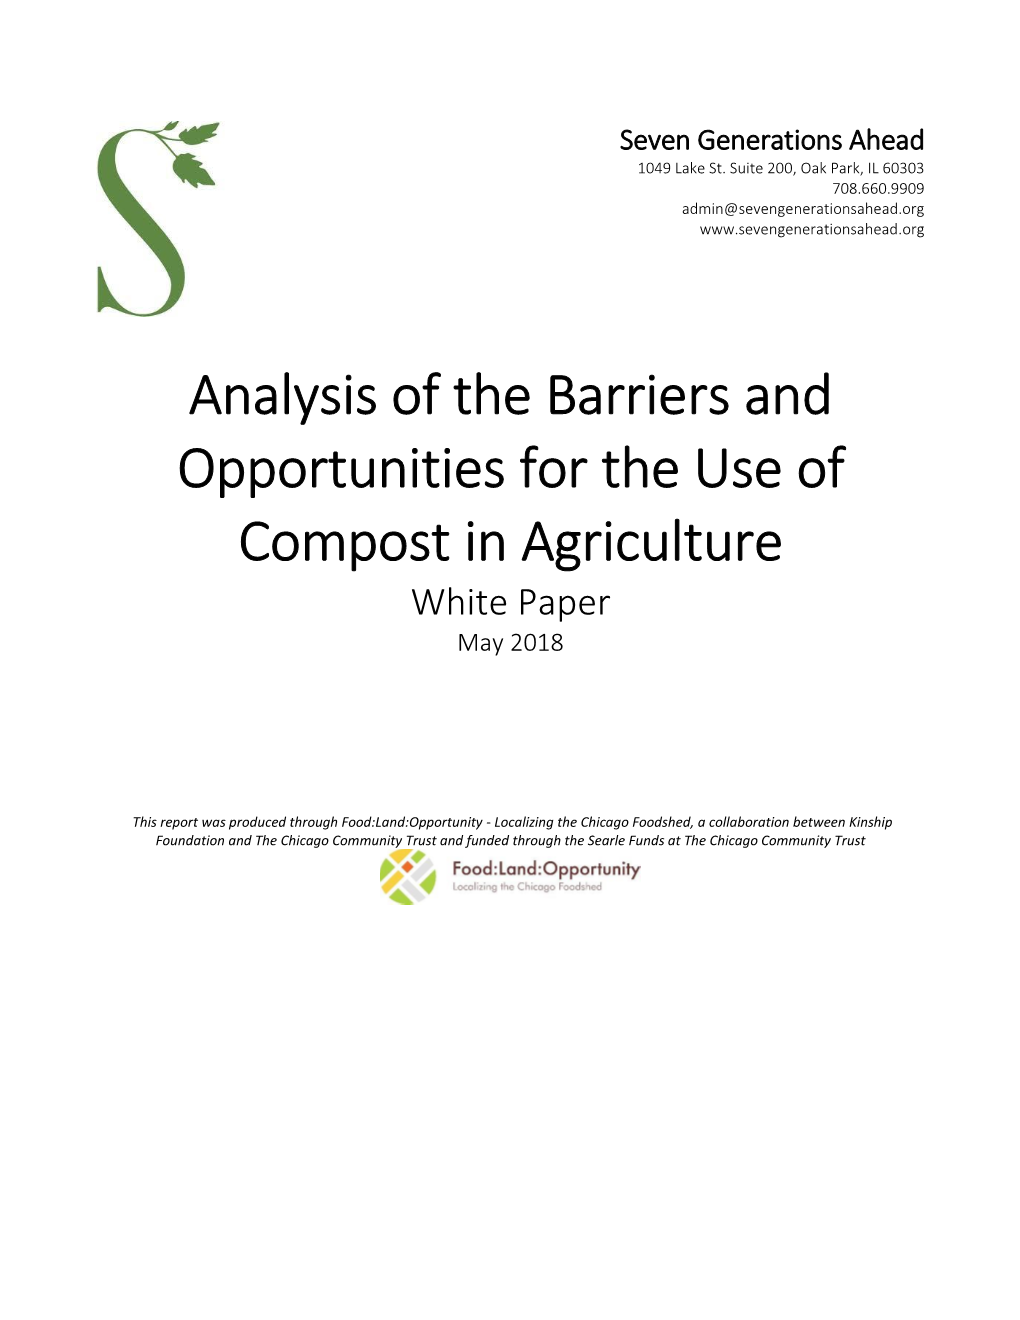 Analysis of the Barriers and Opportunities for the Use of Compost in Agriculture White Paper May 2018